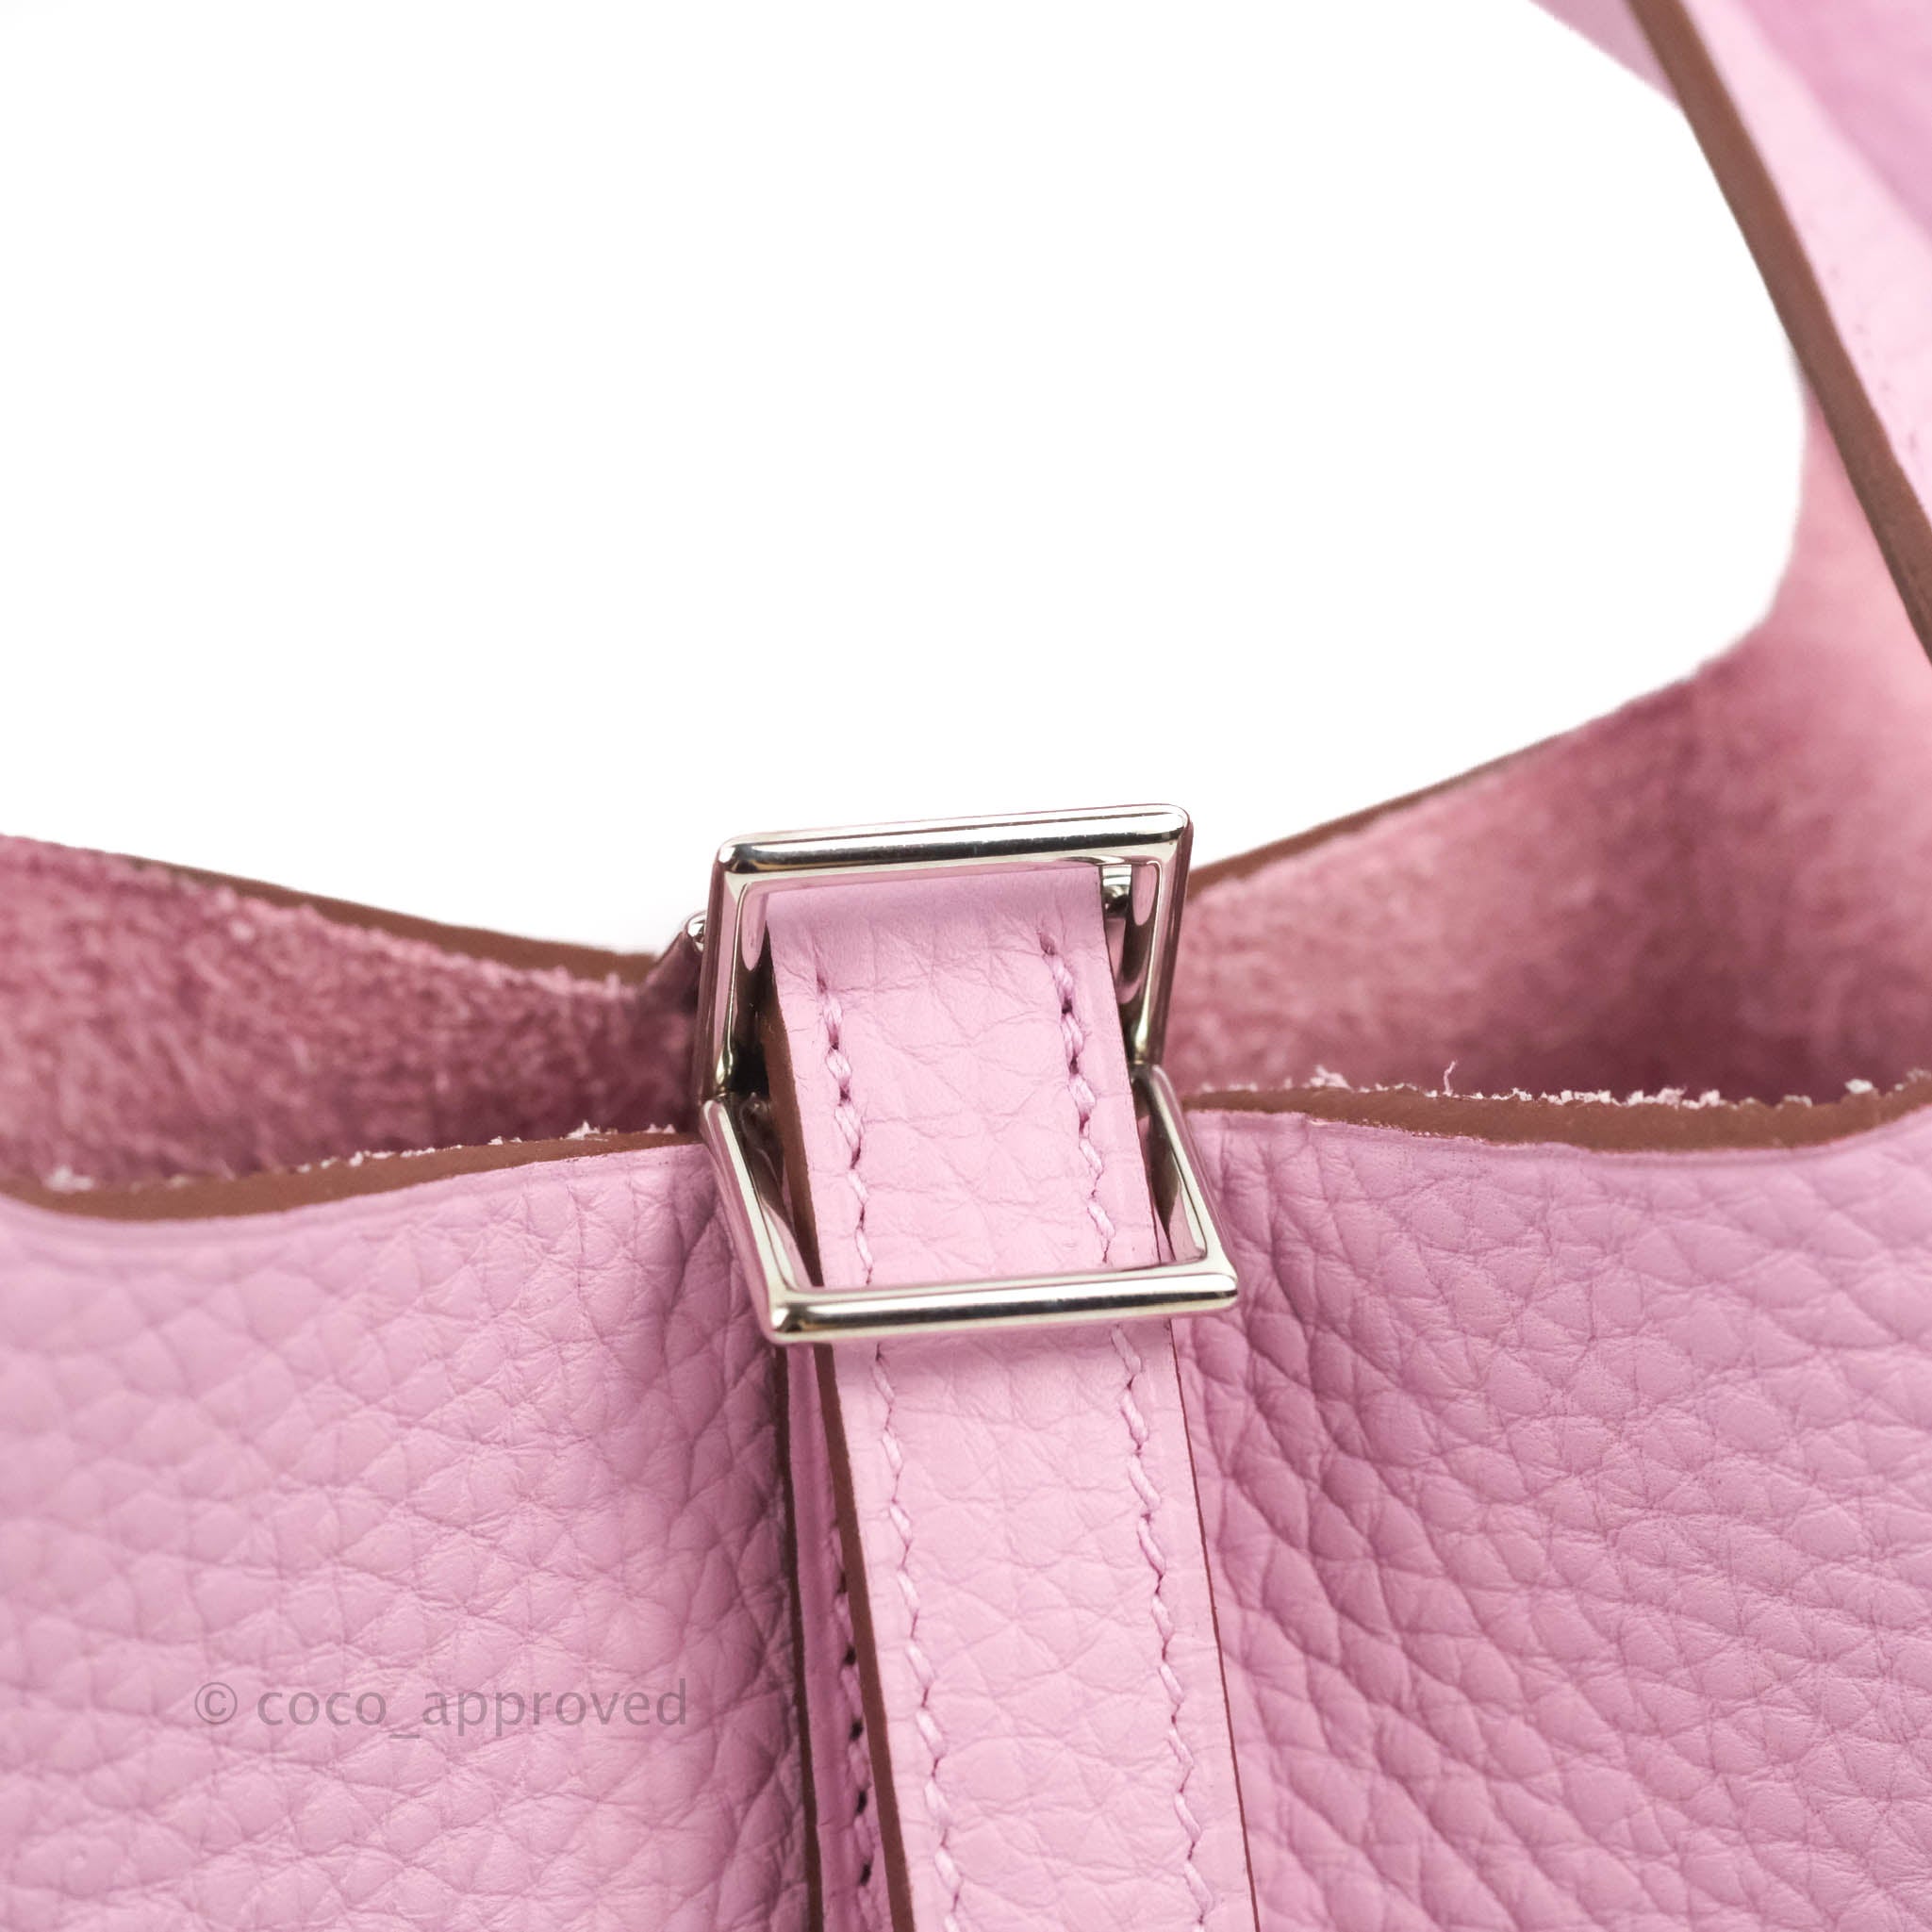  Hermes Picotan Lock PM Handbag, Trillon Clemence, Women's,  Unused, Pink/silver hardware indicated color: rose extreme : Clothing,  Shoes & Jewelry